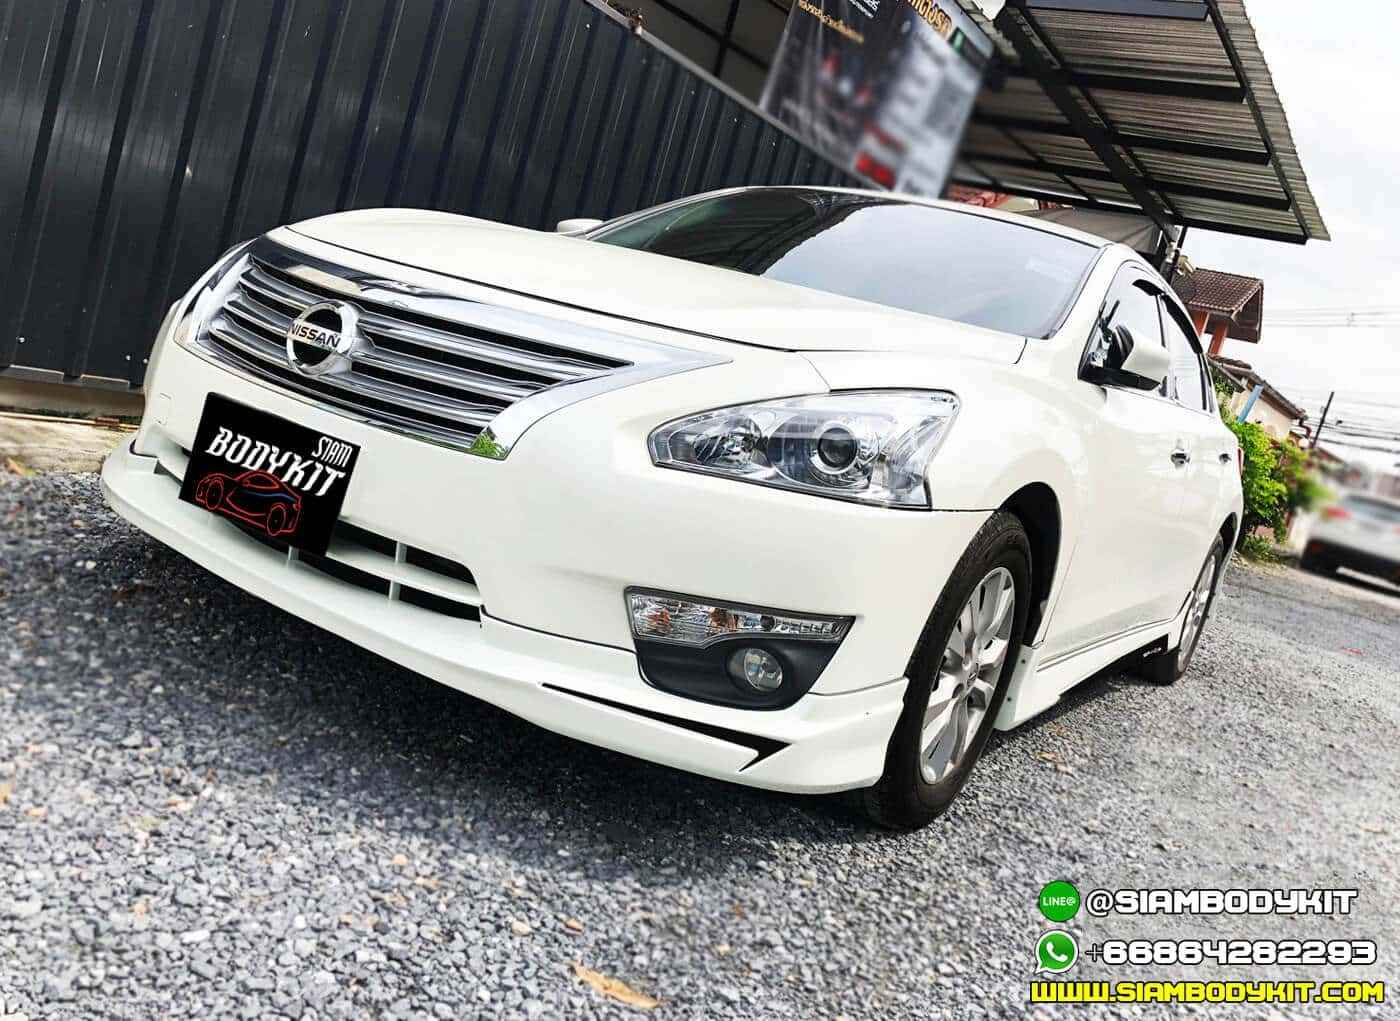 Space Bodykit for Nissan Teana L33 (COLOR)